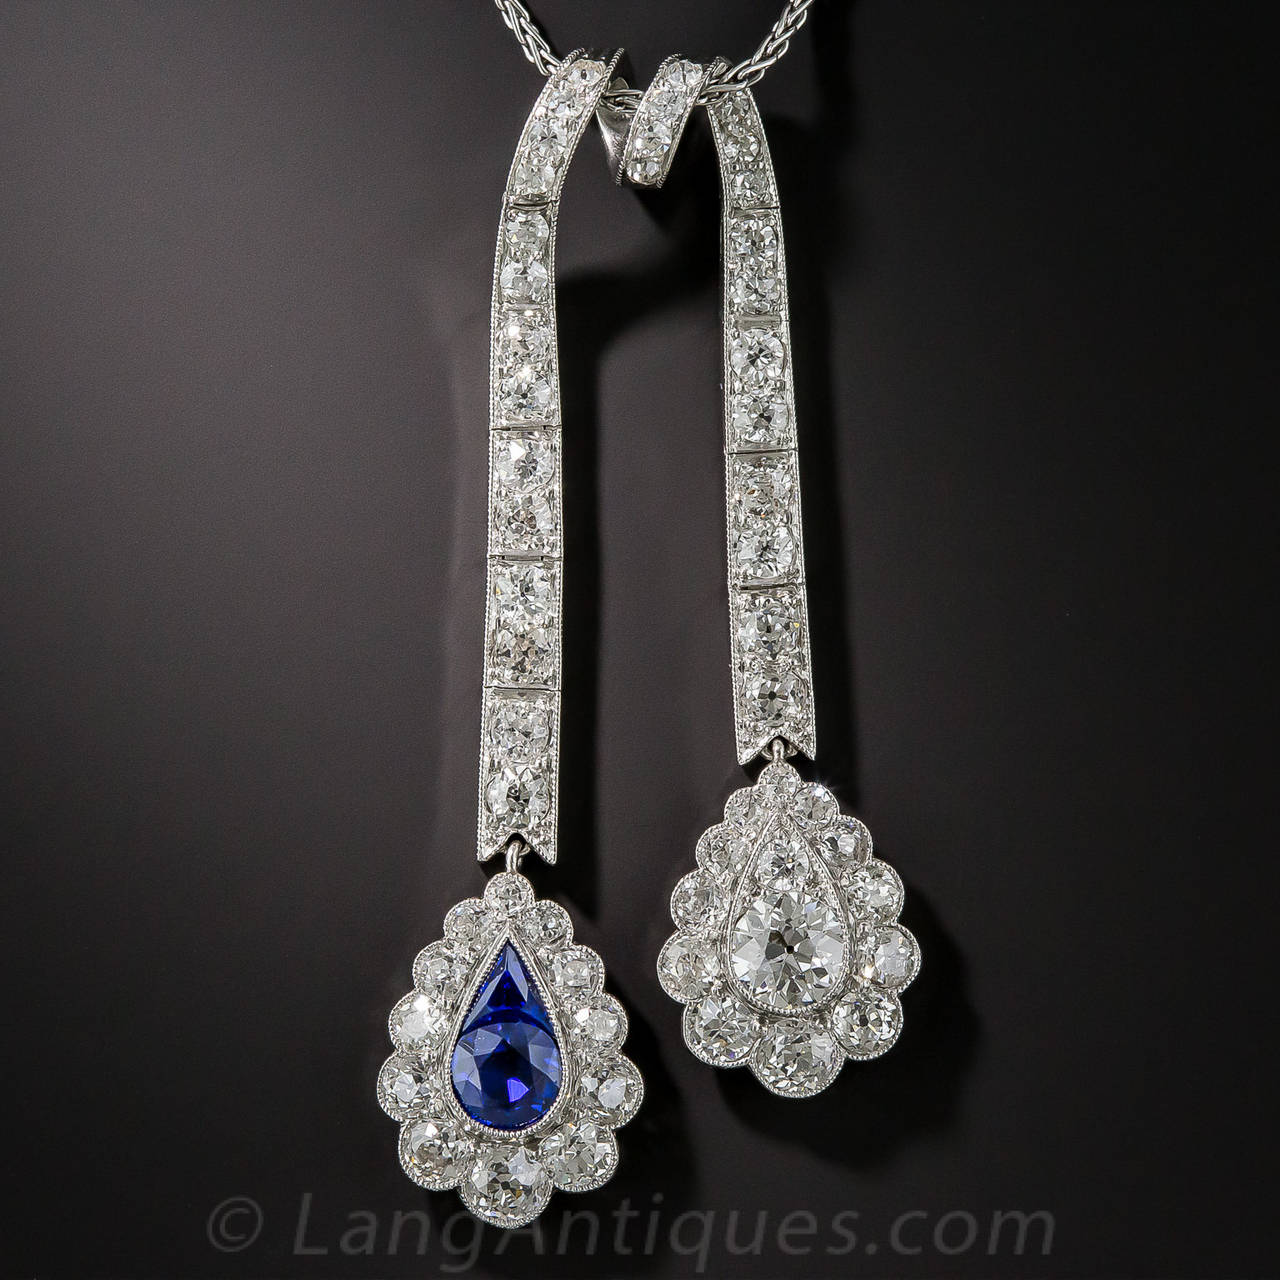 In the jewelry world, lavalier necklaces with asymmetrical drops such as this are referred to as negligees (not to be confused with the slinky sheer nightgowns), and this sparkling early-twentieth century jewel, in glorious blue & white, is as